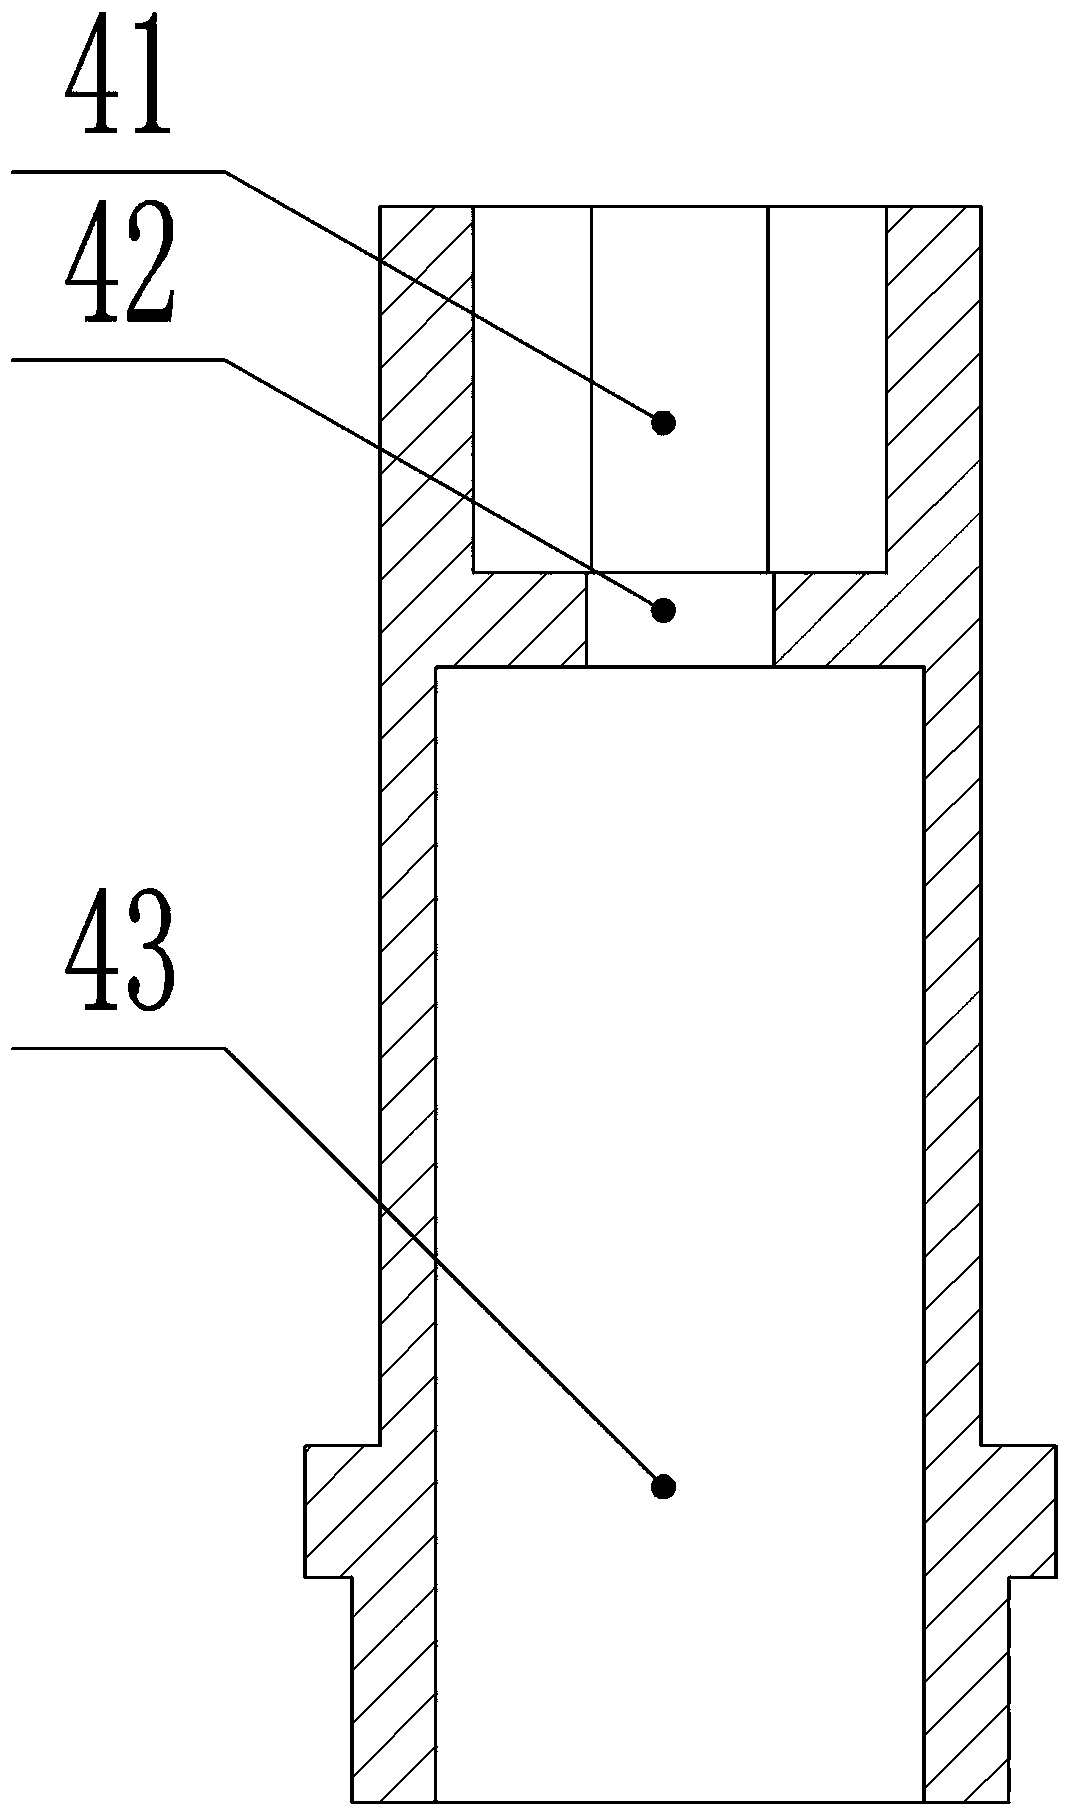 Quickly-opened embrasure